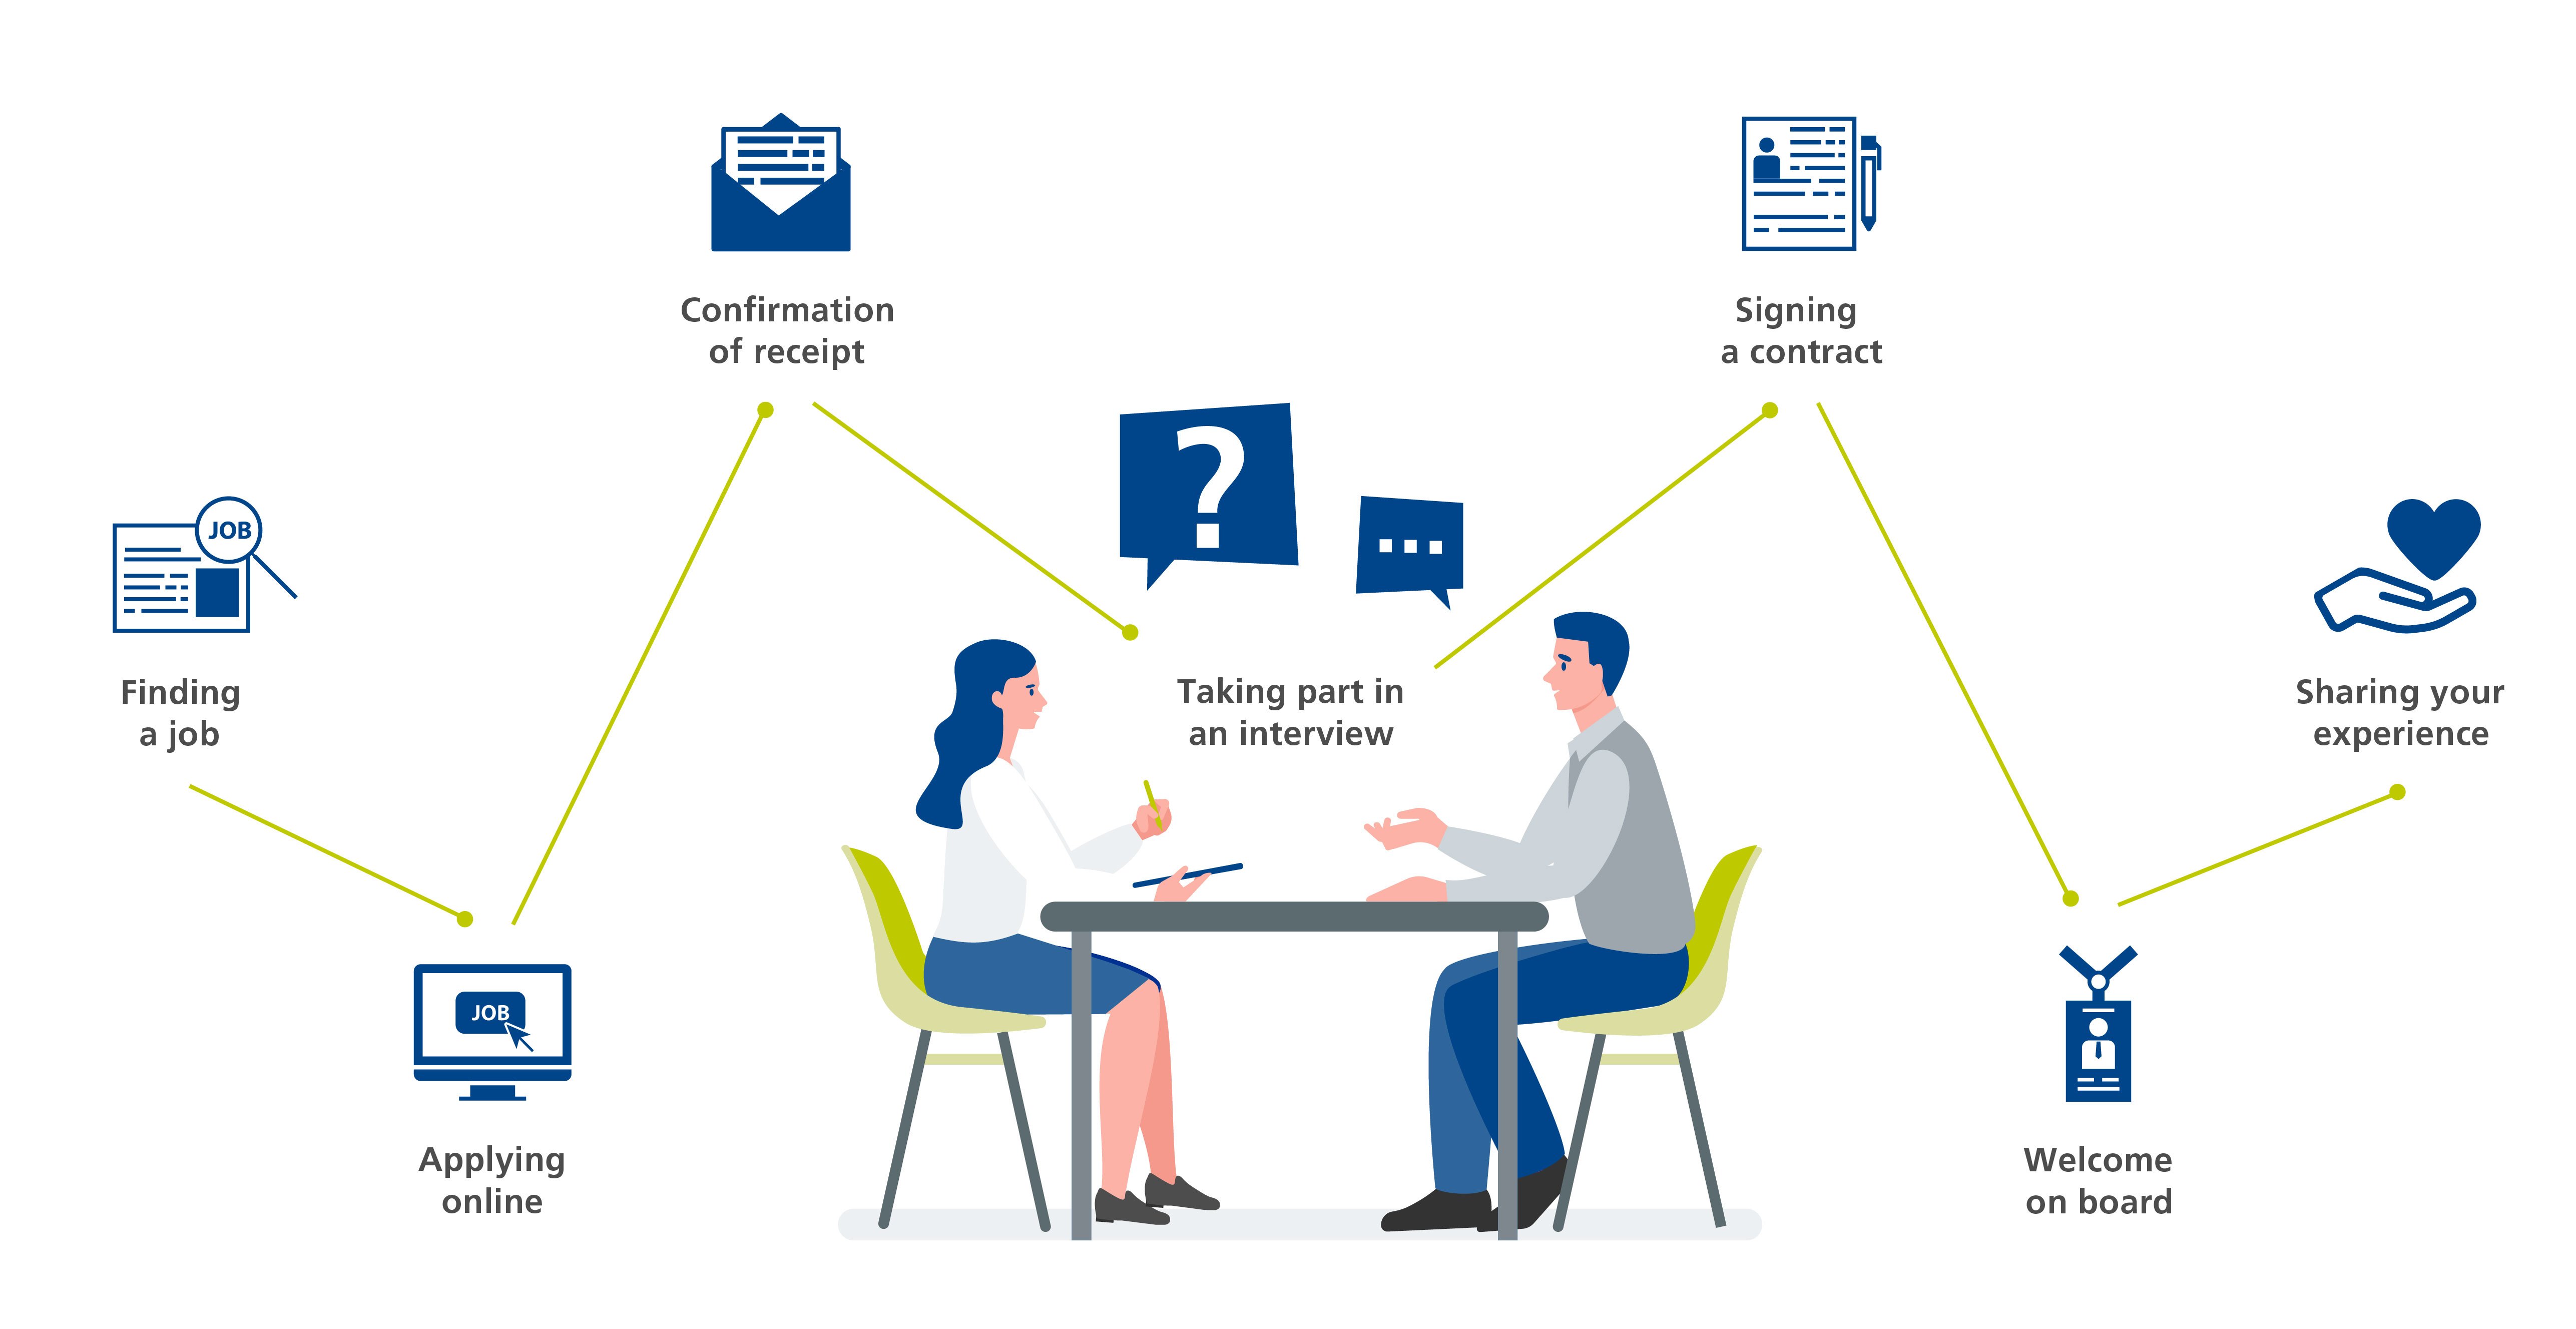 An illustration of two people in an interview and the steps of the application process.